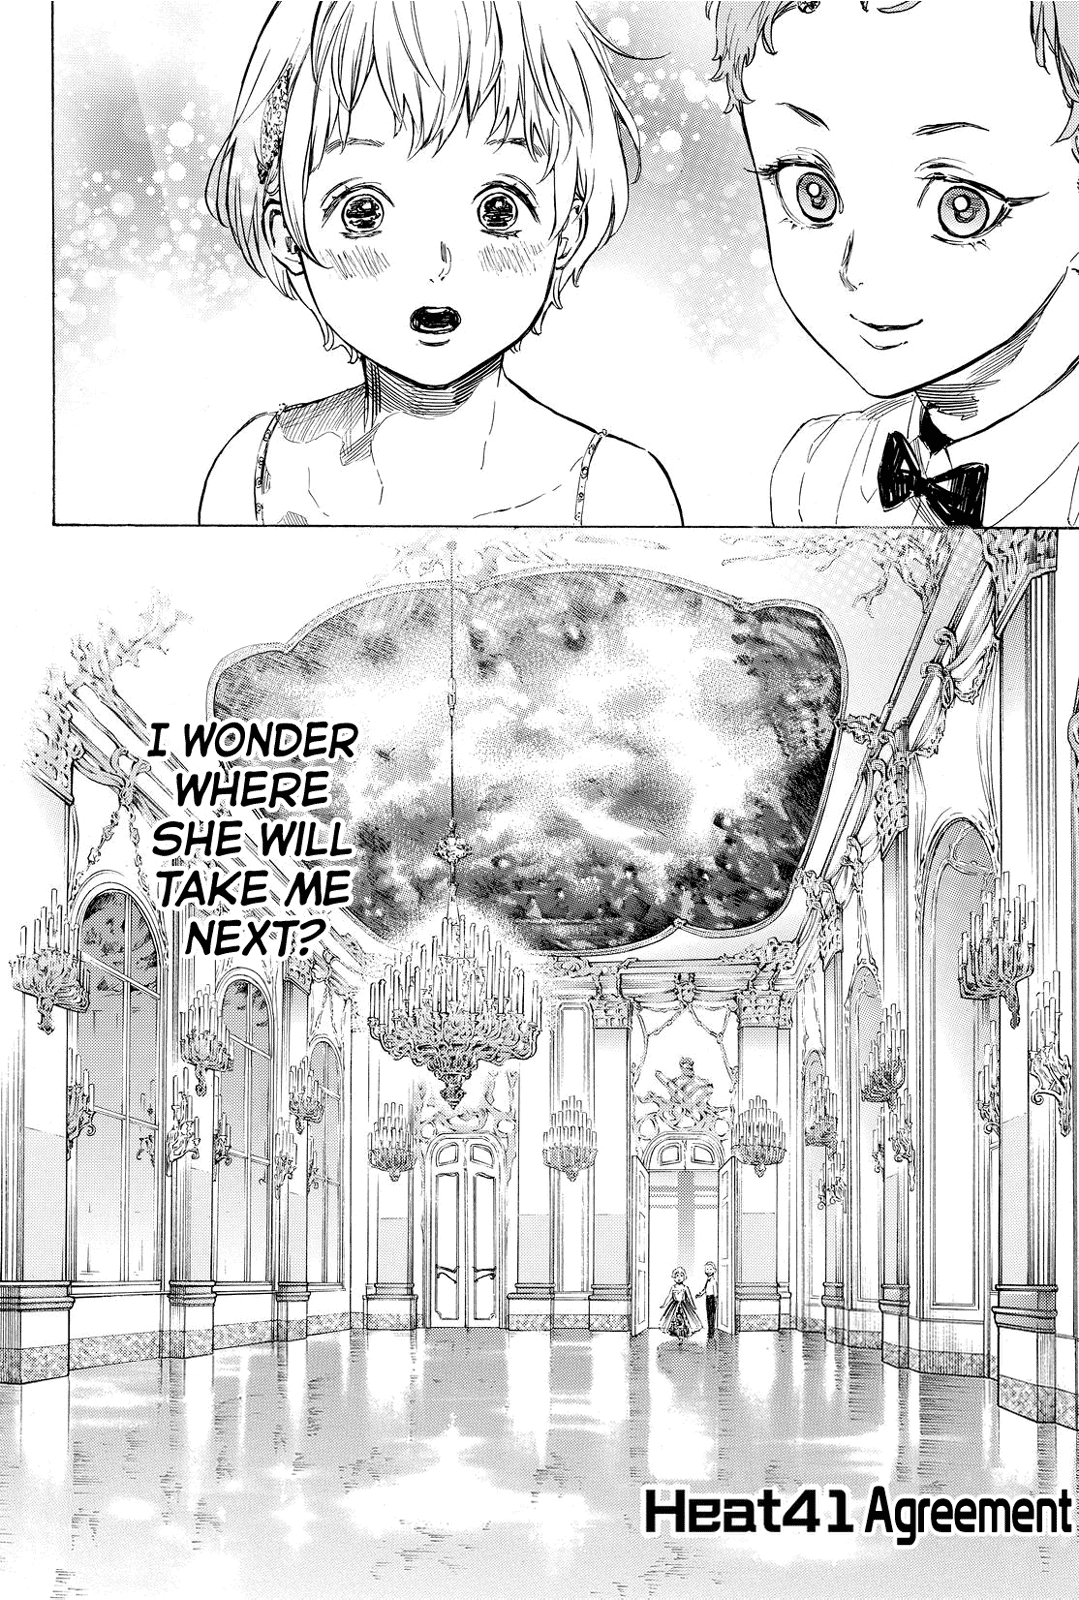 Ballroom E Youkoso Vol.9 Chapter 41: Agreement - Picture 2